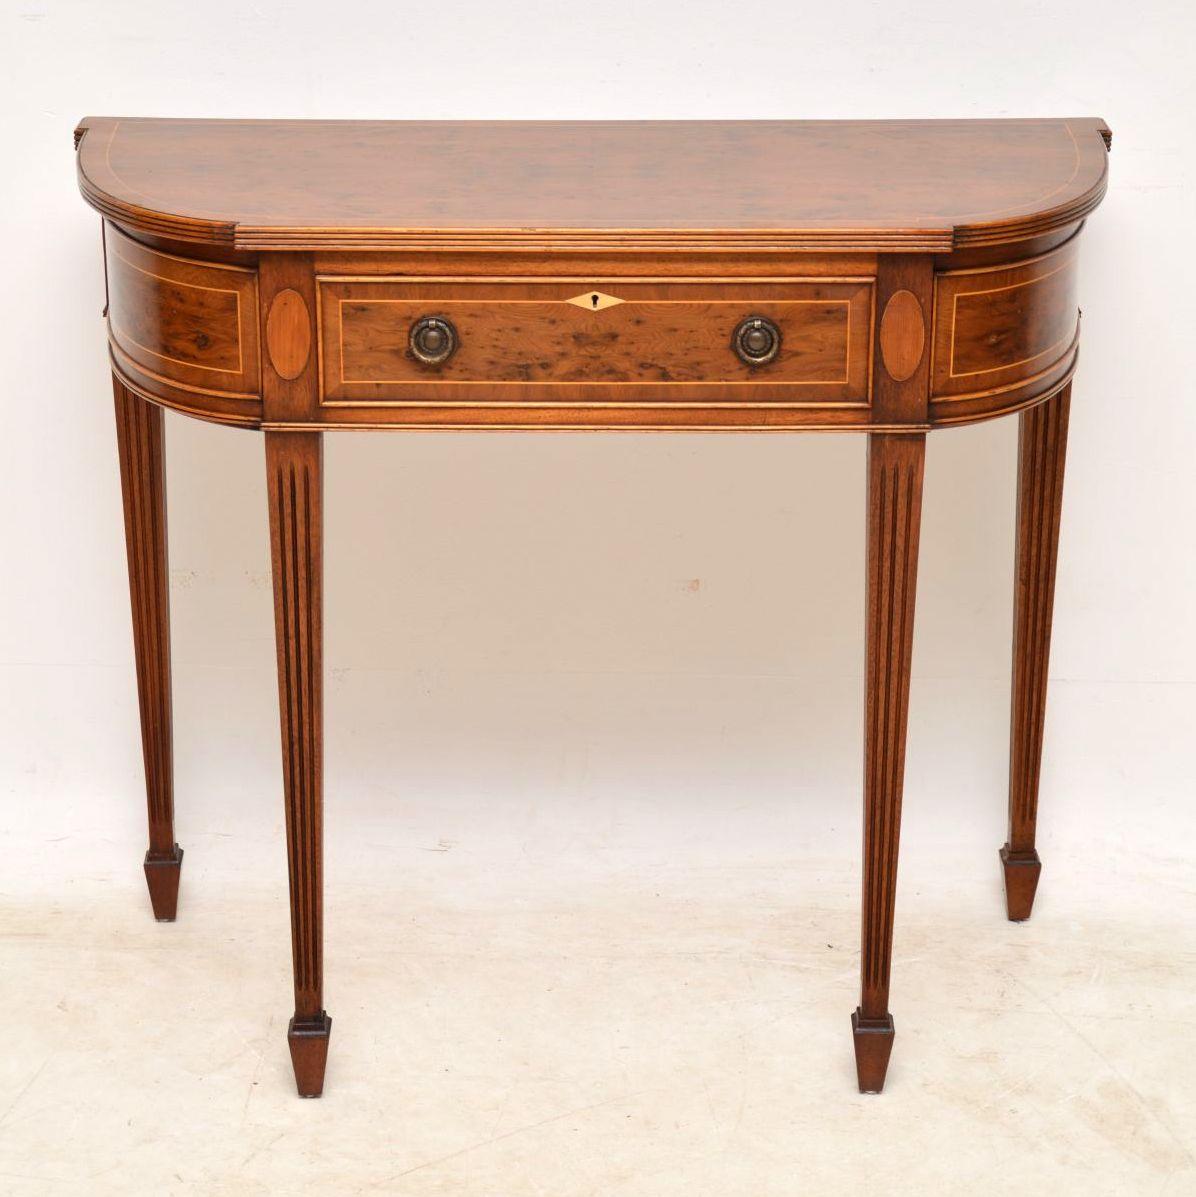 This antique Georgian style yew wood console table is fine quality and has many intricate features. The top, the drawer and the curved sides are all yew wood, with satinwood inlays and cross banding. The top front edge is reeded and the tapered